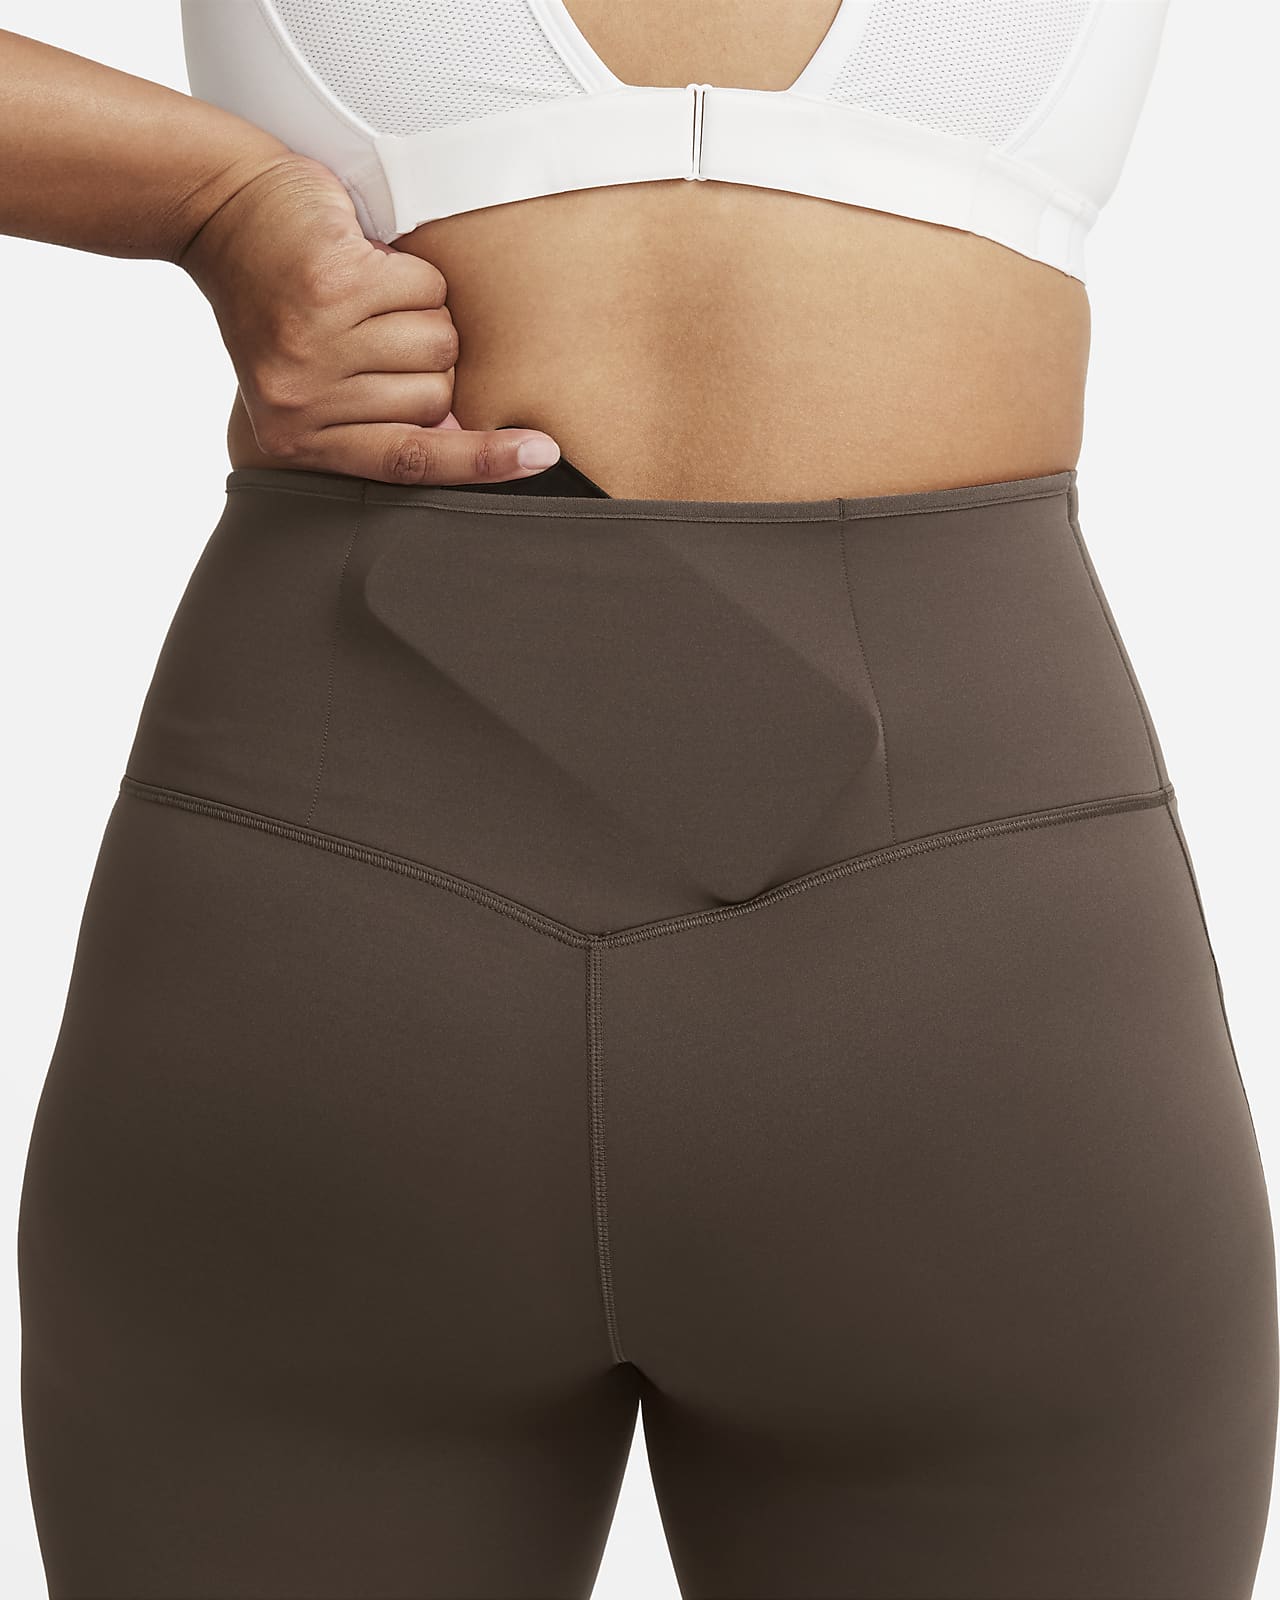 Nike Go Women's Firm-Support High-Waisted 7/8 Leggings with Pockets. Nike .com